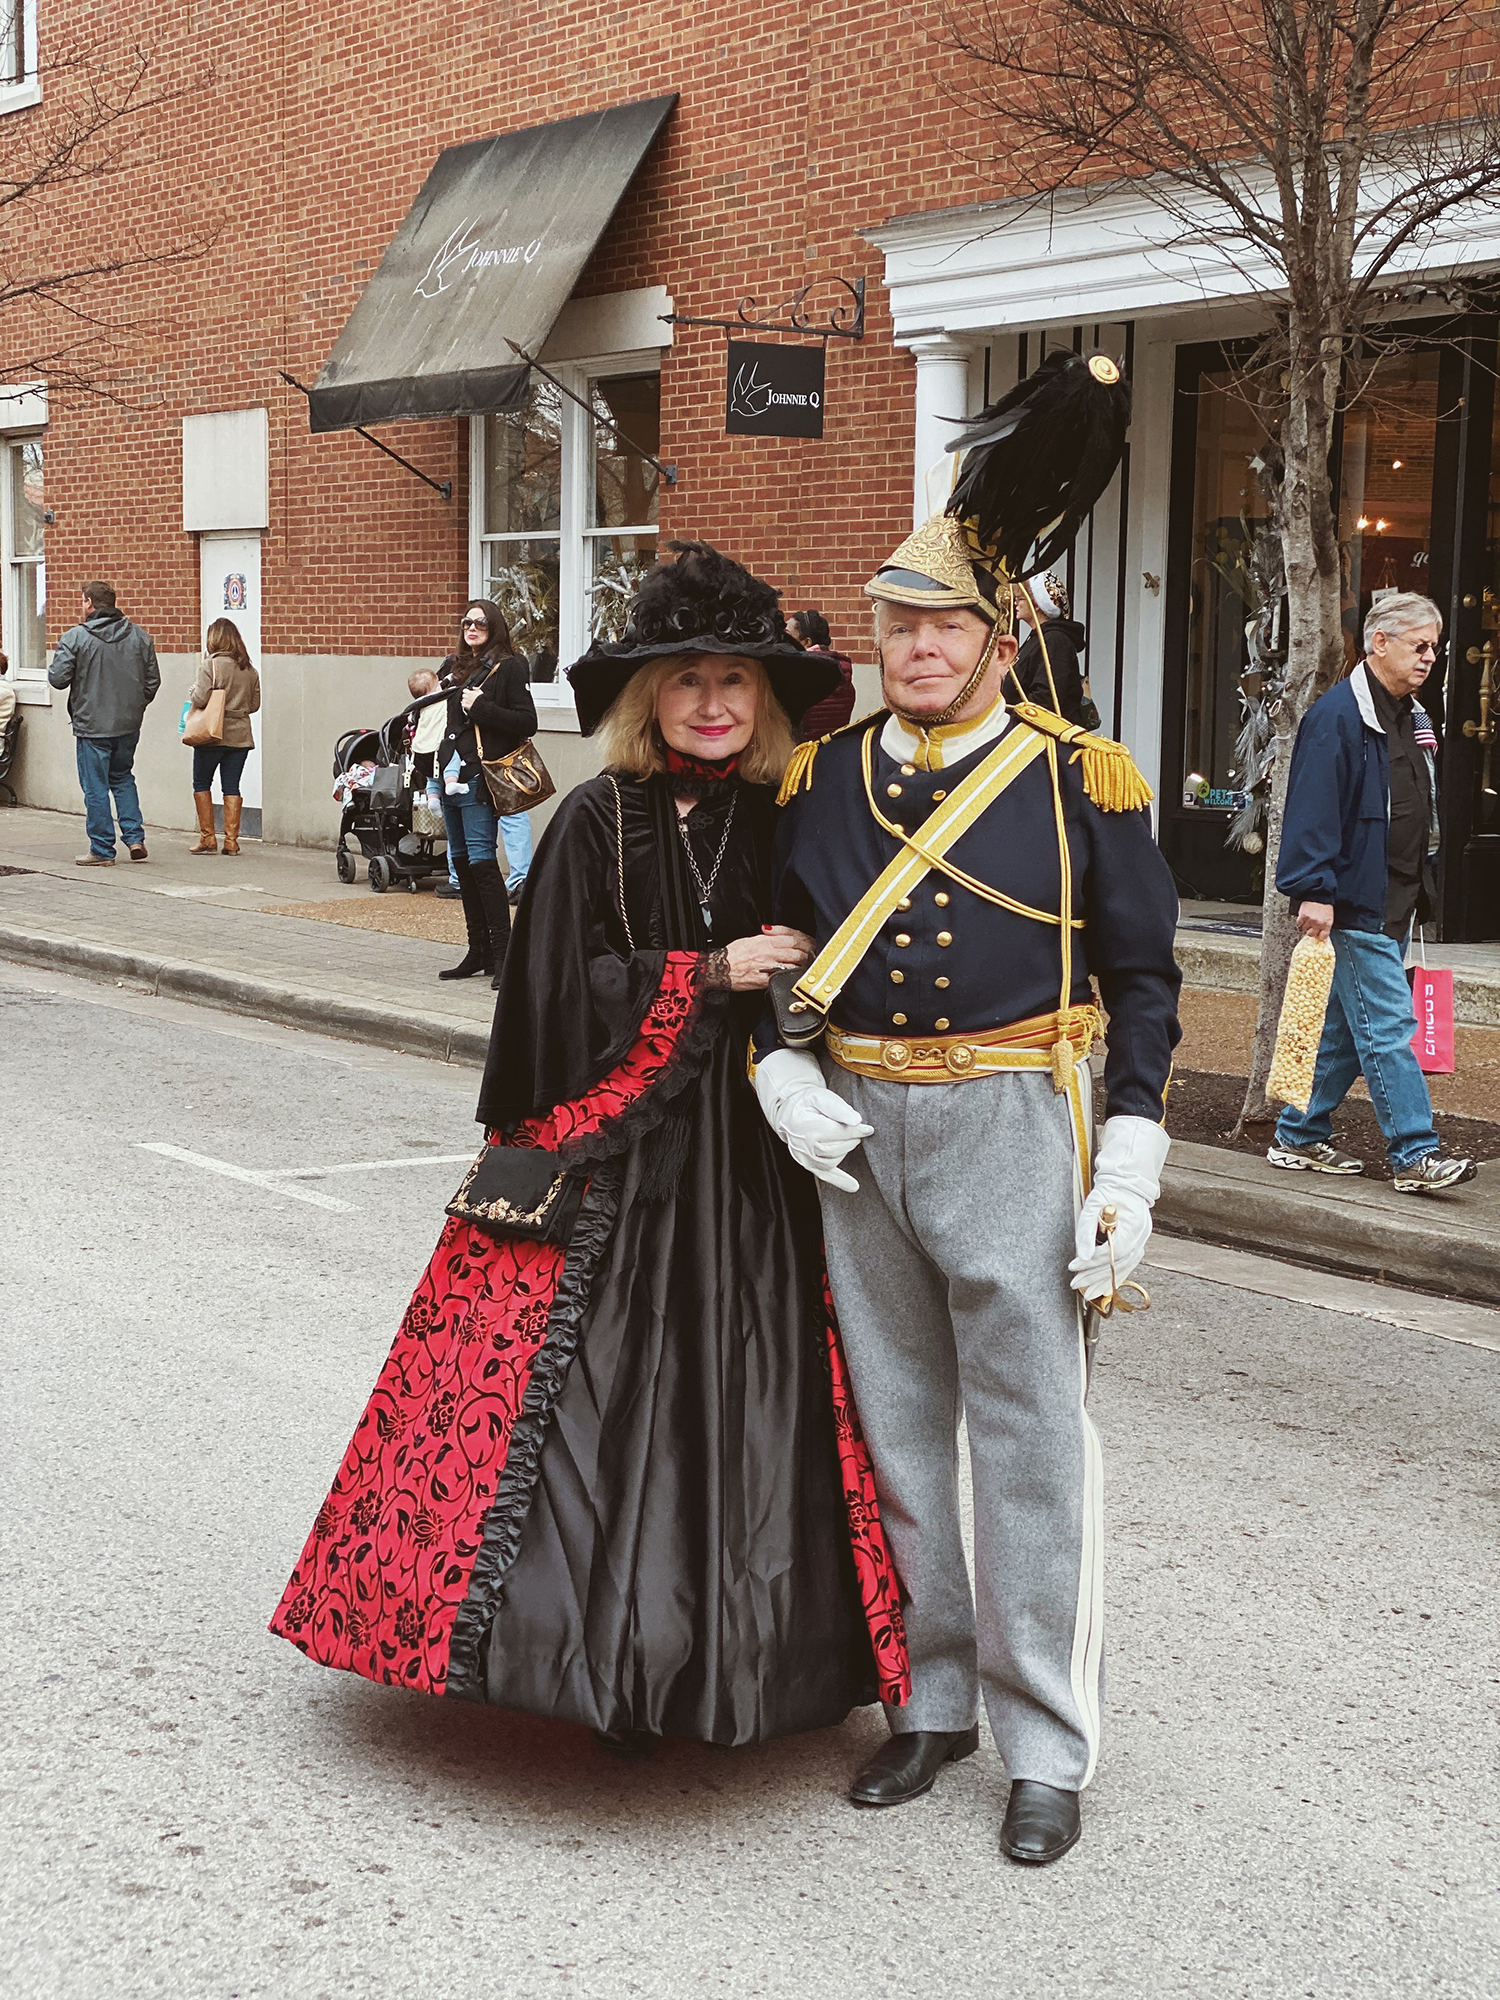 Our first Dickens of a Christmas on Franklin's Main Street. And we just couldn't wipe the smiles off of our faces. From the people to the music, it was the most amazing Christmas ambiance. Get a look into all the festivities over on Haus of Layne! #AmericasFavoriteMainStreet #ThingsToDoInNashville #ThingsToDoInNashvilleInDecember #ThingsToDoInNashvilleWIthKids #FranklinTennessee #FranklinTN #HistoricFranklinTN #FranklinTennesseeMainStreet #DickensOfAChristmasFranklinTN #ChristmasInTennessee #ChristmasInNashville #NashvilleBlogger #ThingsToDoInFranklinTN #ThingsToDoInFranklinTennessee